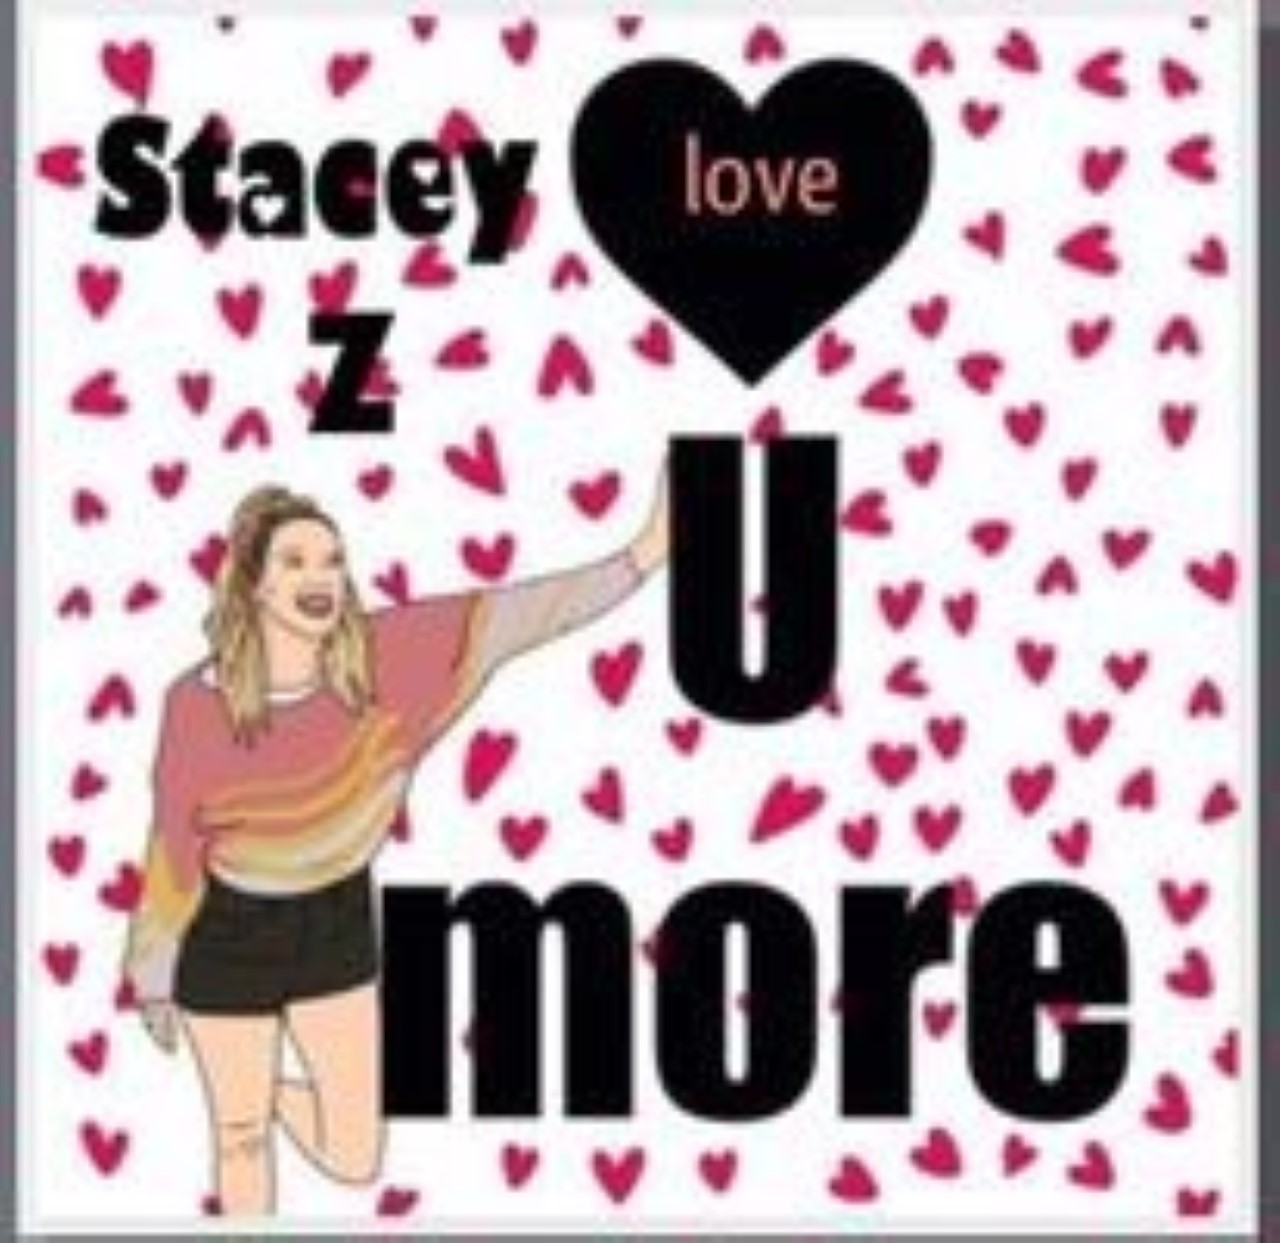 Art for Love You More by Stacey Z